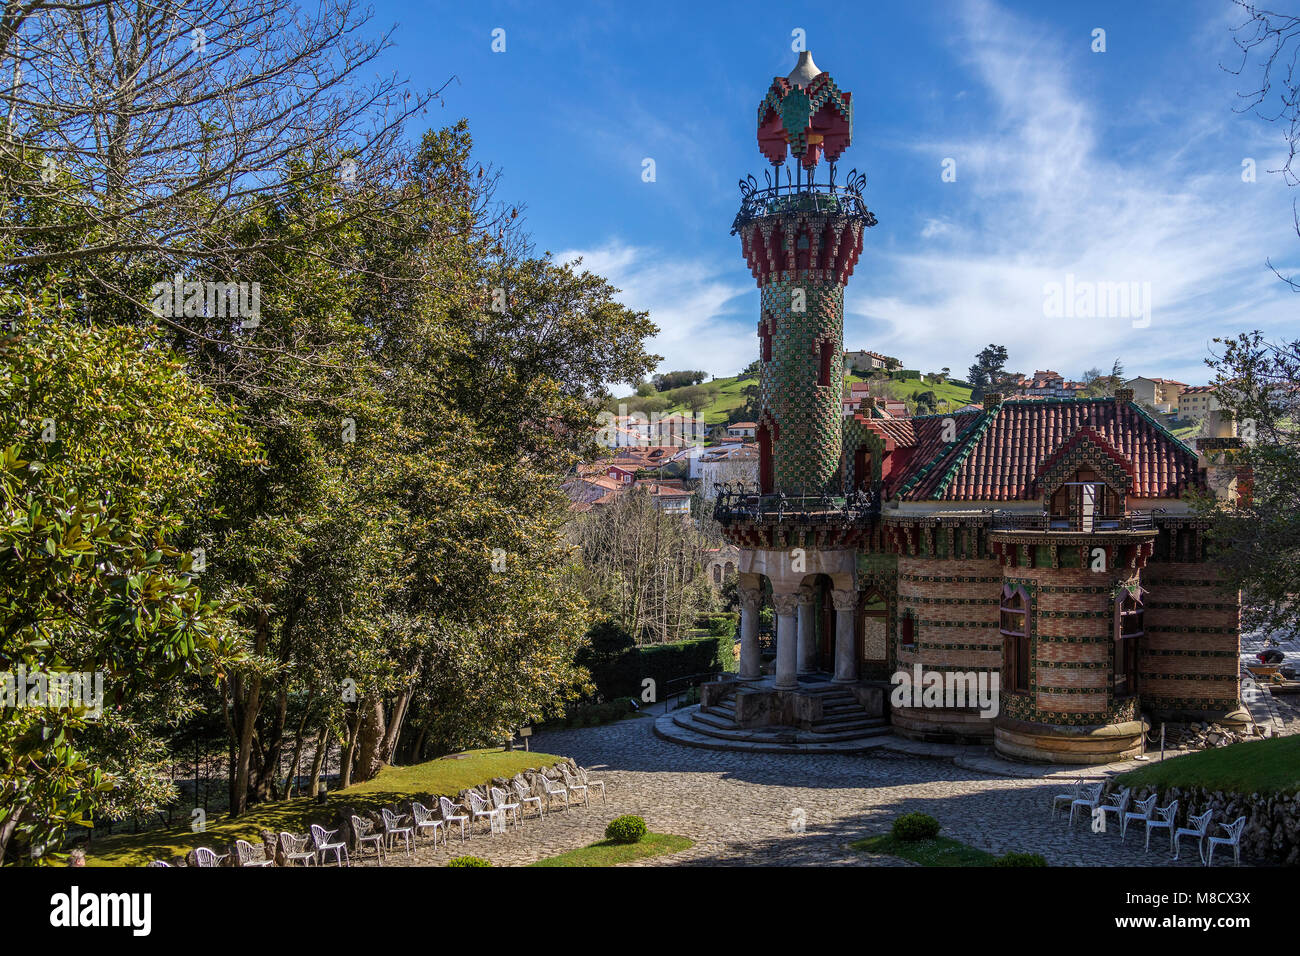 Anton Gaudi’s El Capricho, a modernista landmark in the coastal town of Comillas in the Cantabria region of northern Spain. Stock Photo